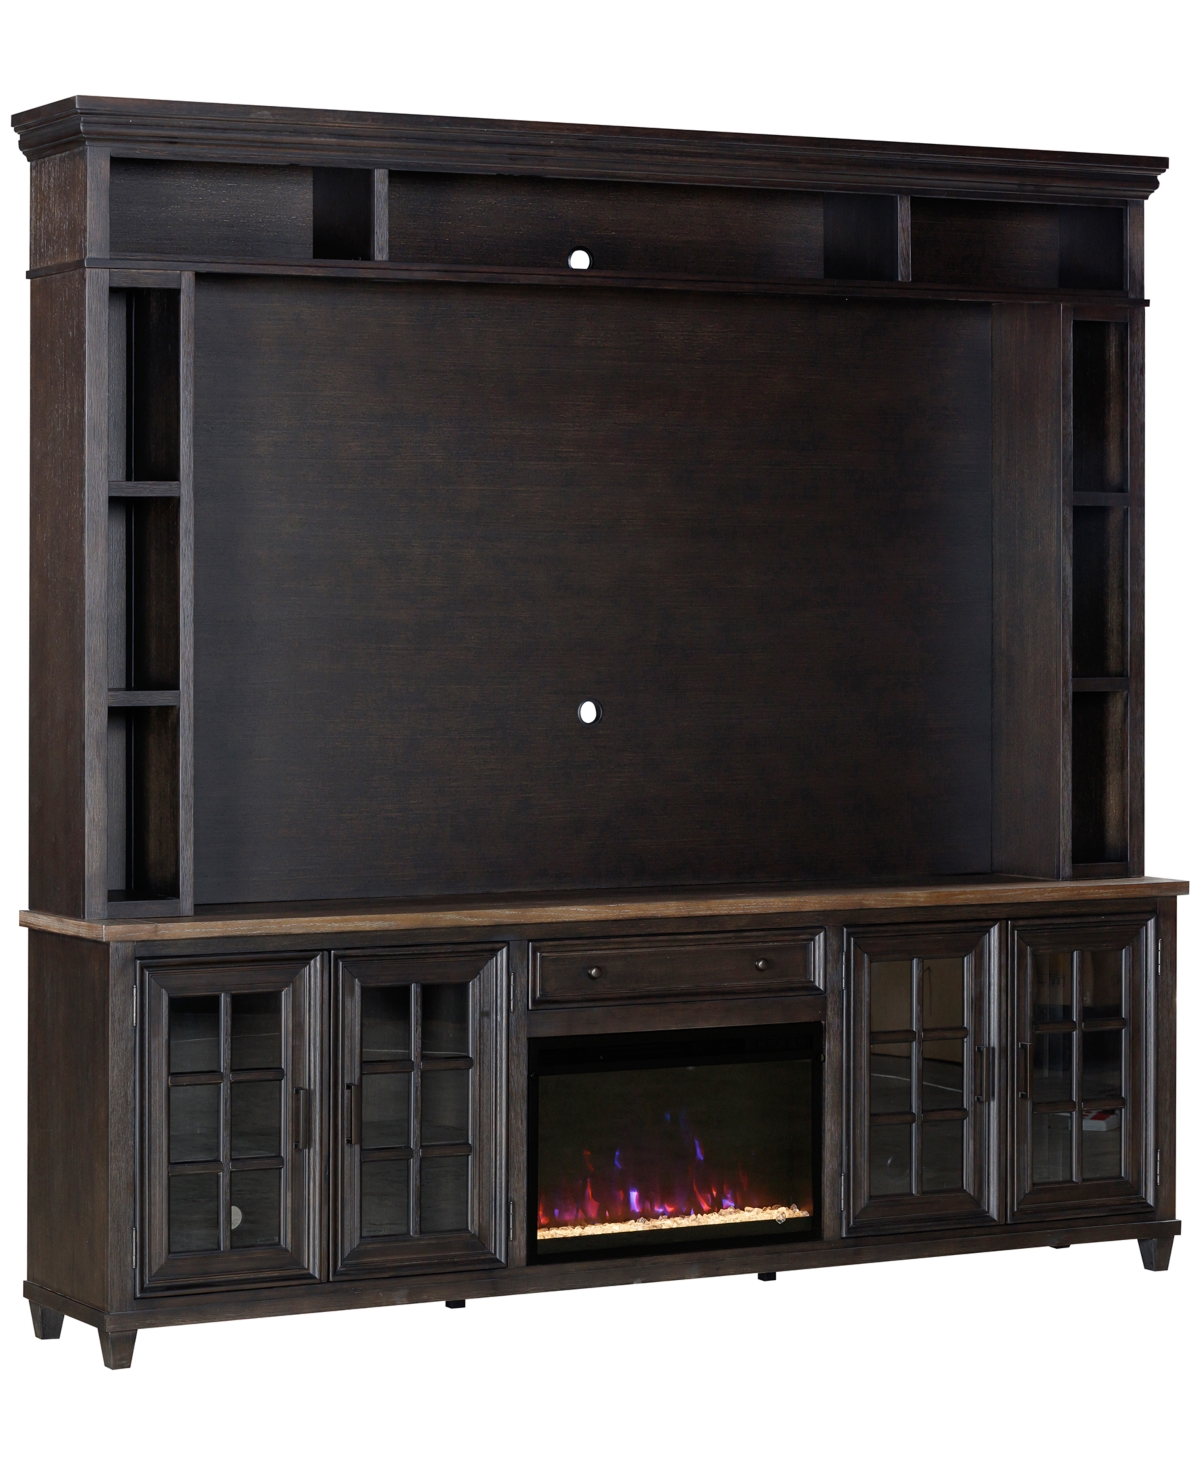 Macy's 96" Dawnwood 3pc Tv Console Set (96" Console, Hutch And Fireplace) In Espresso